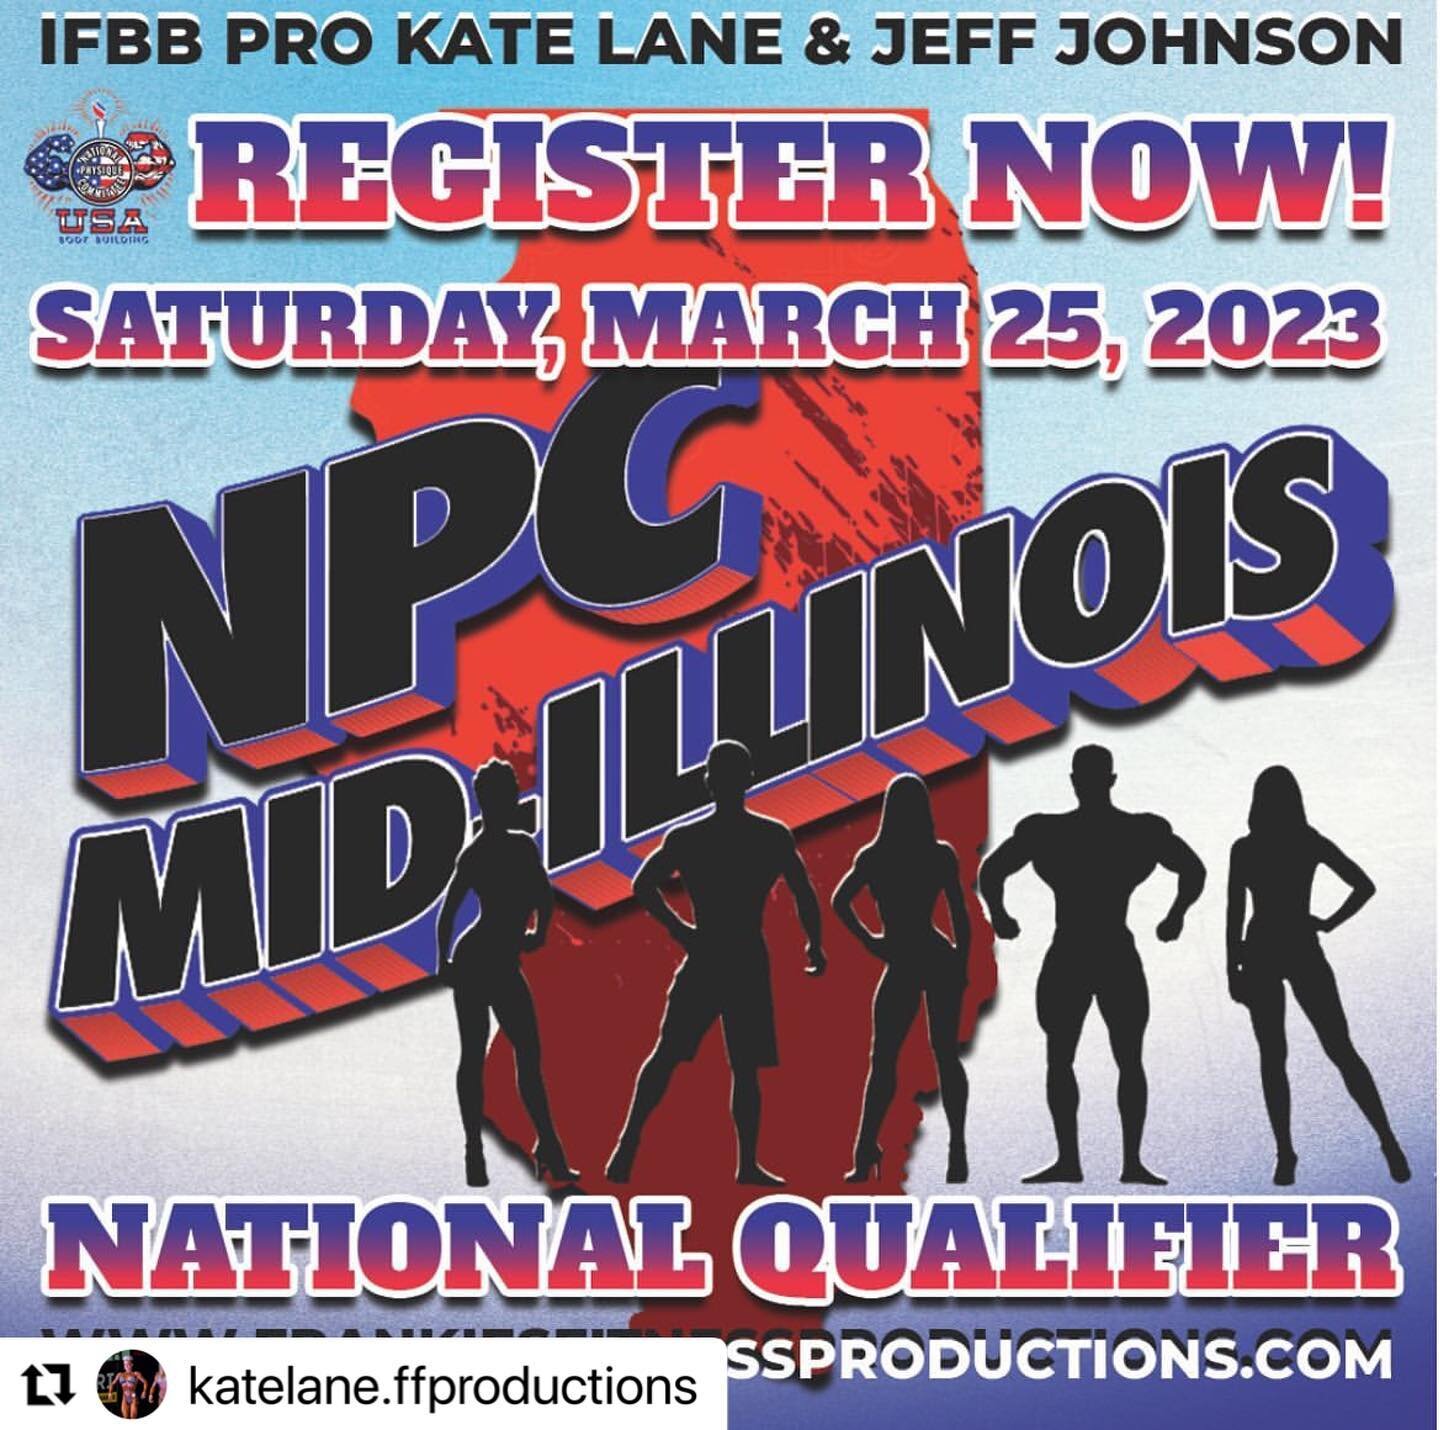 BOOK YOUR COMPETITION SPRAY TAN WE ARE NOW OPEN TO BOOK‼️ Email: usaspraytan@gmail.com #Repost @katelane.ffproductions with @use.repost
・・・
💪🏼🏆 Registration is now open for the 2023 NPC Mid-Illinois! 💪🏼🏆

✅ National Qualifier

📆SATURDAY, MARCH